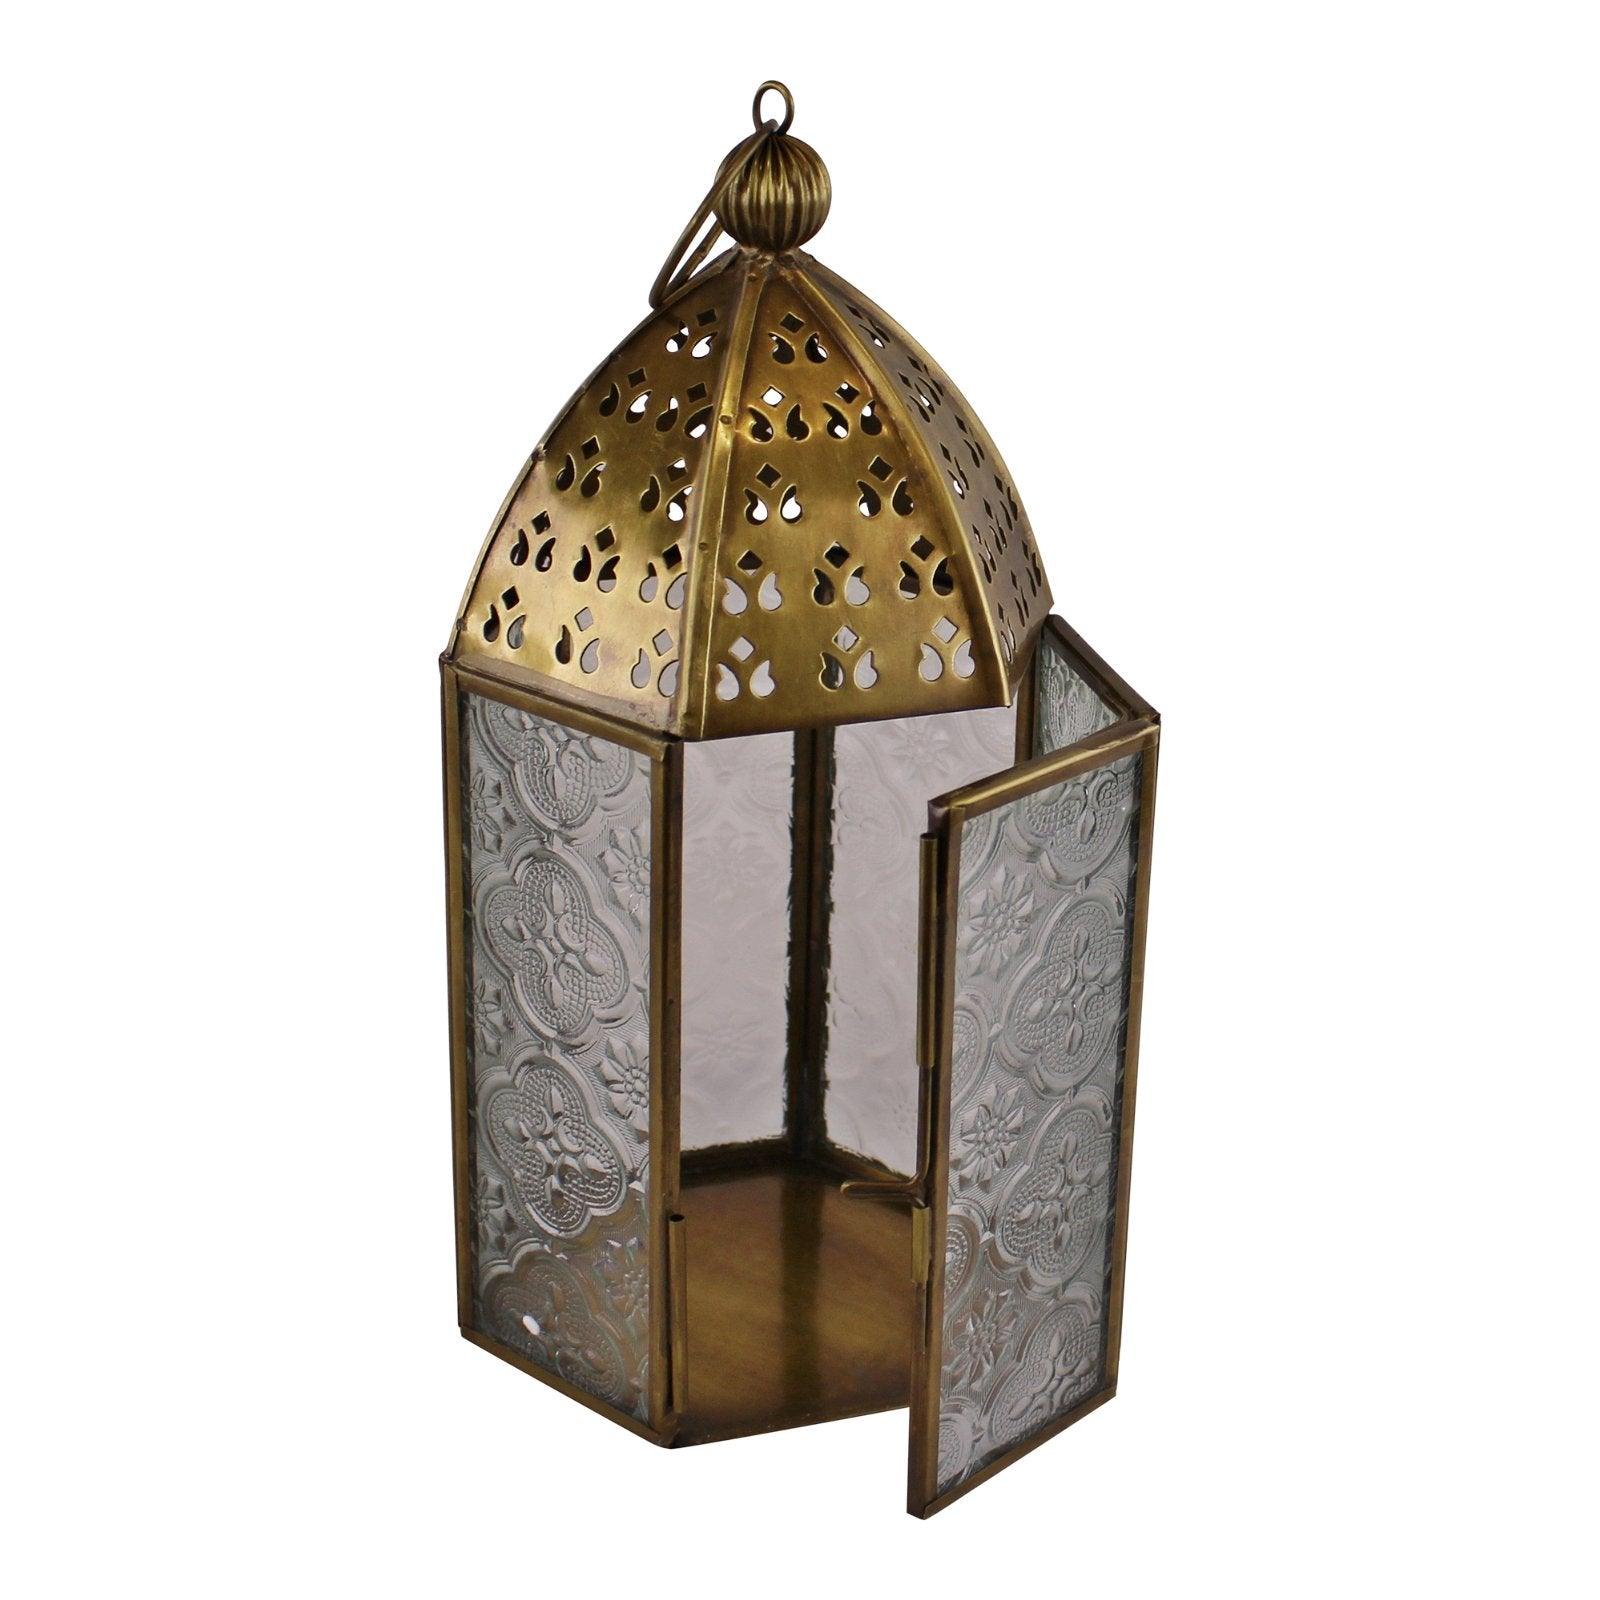 View Small Gold Metal Moroccan Style Kasbah Candle Lantern information